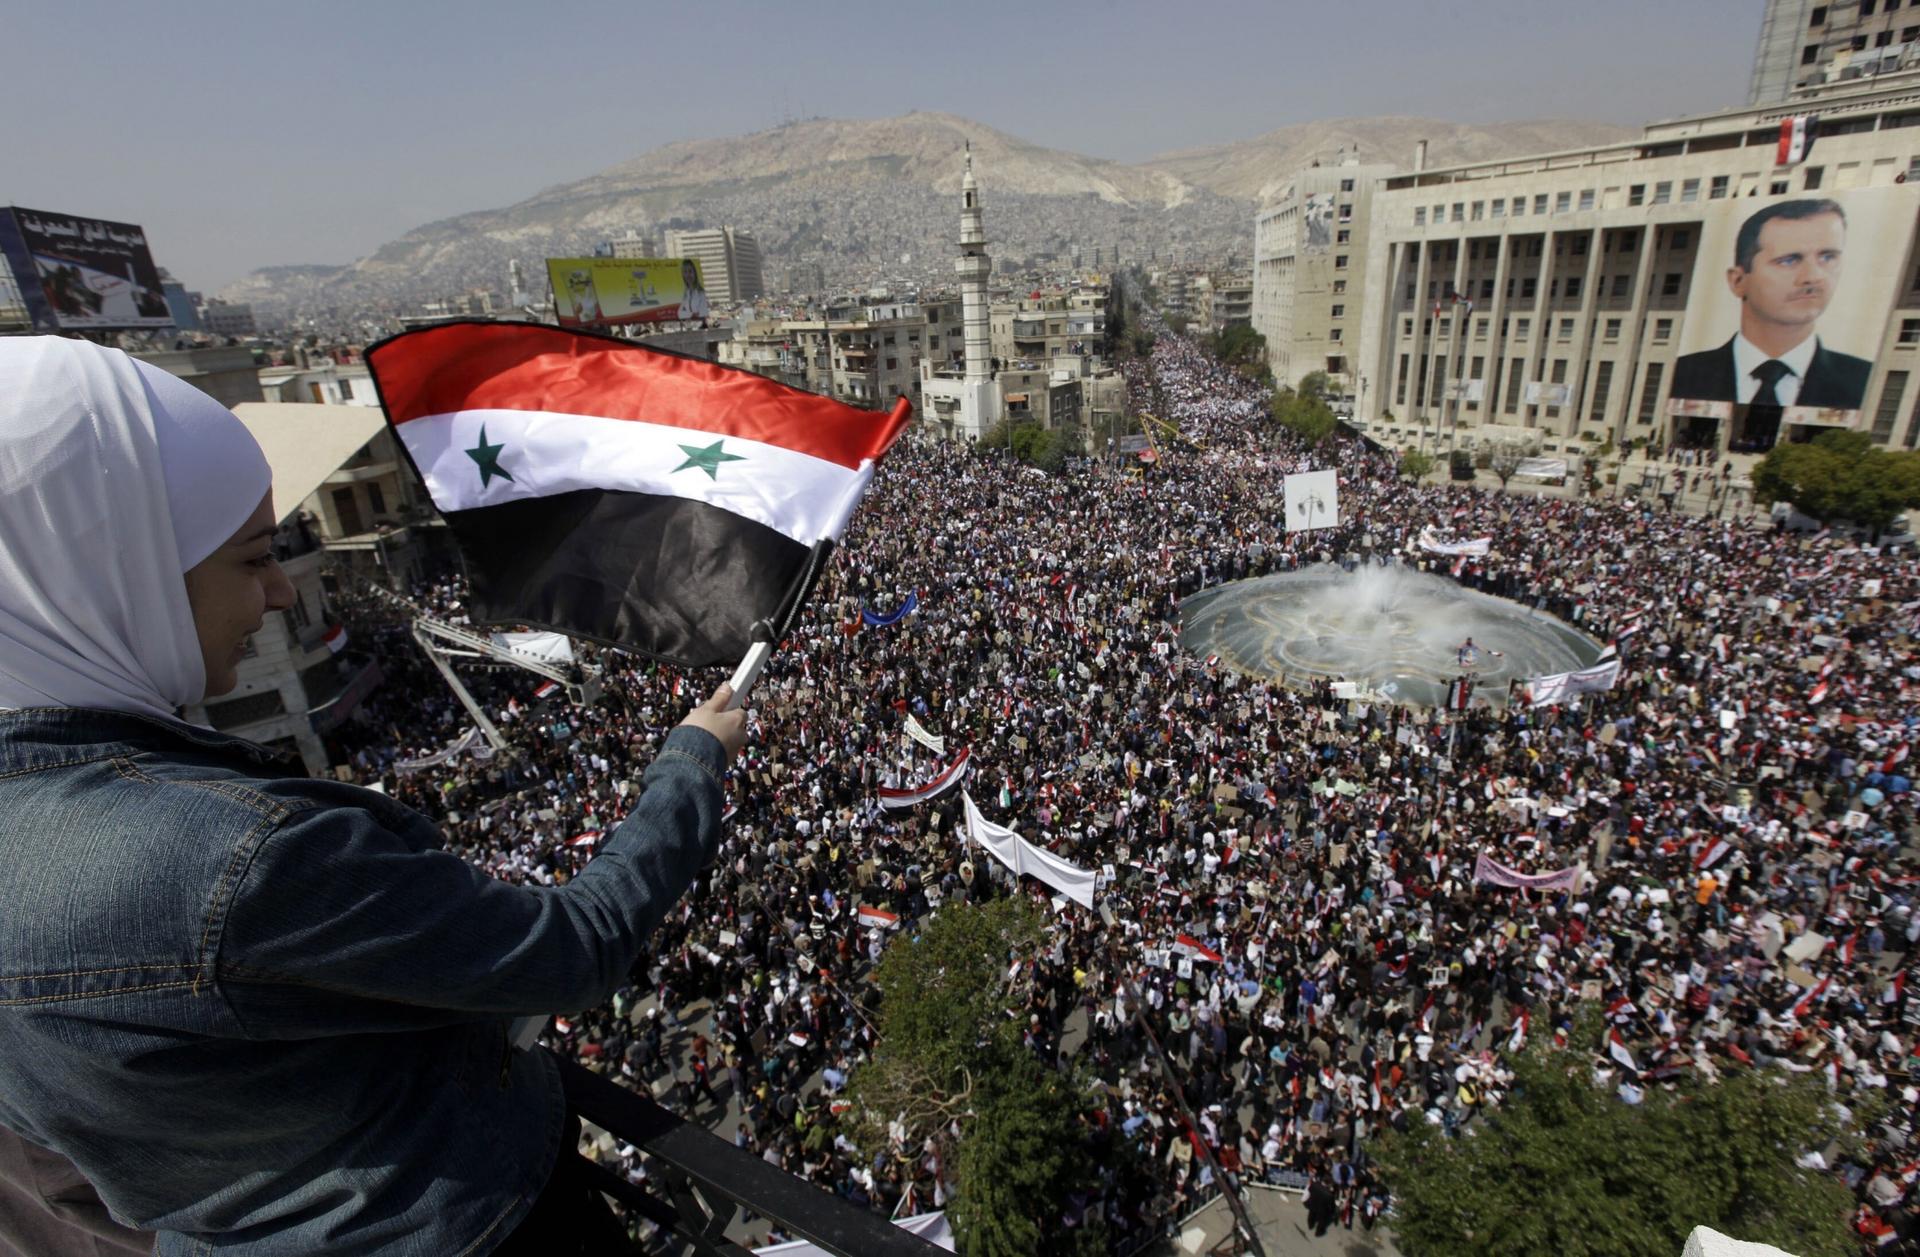 A supporter of Syrian President Bashar Assad waves a Syrian flag as she looks over a crowd gathered to show support for their president in Damascus, Syria, March 29, 2011.